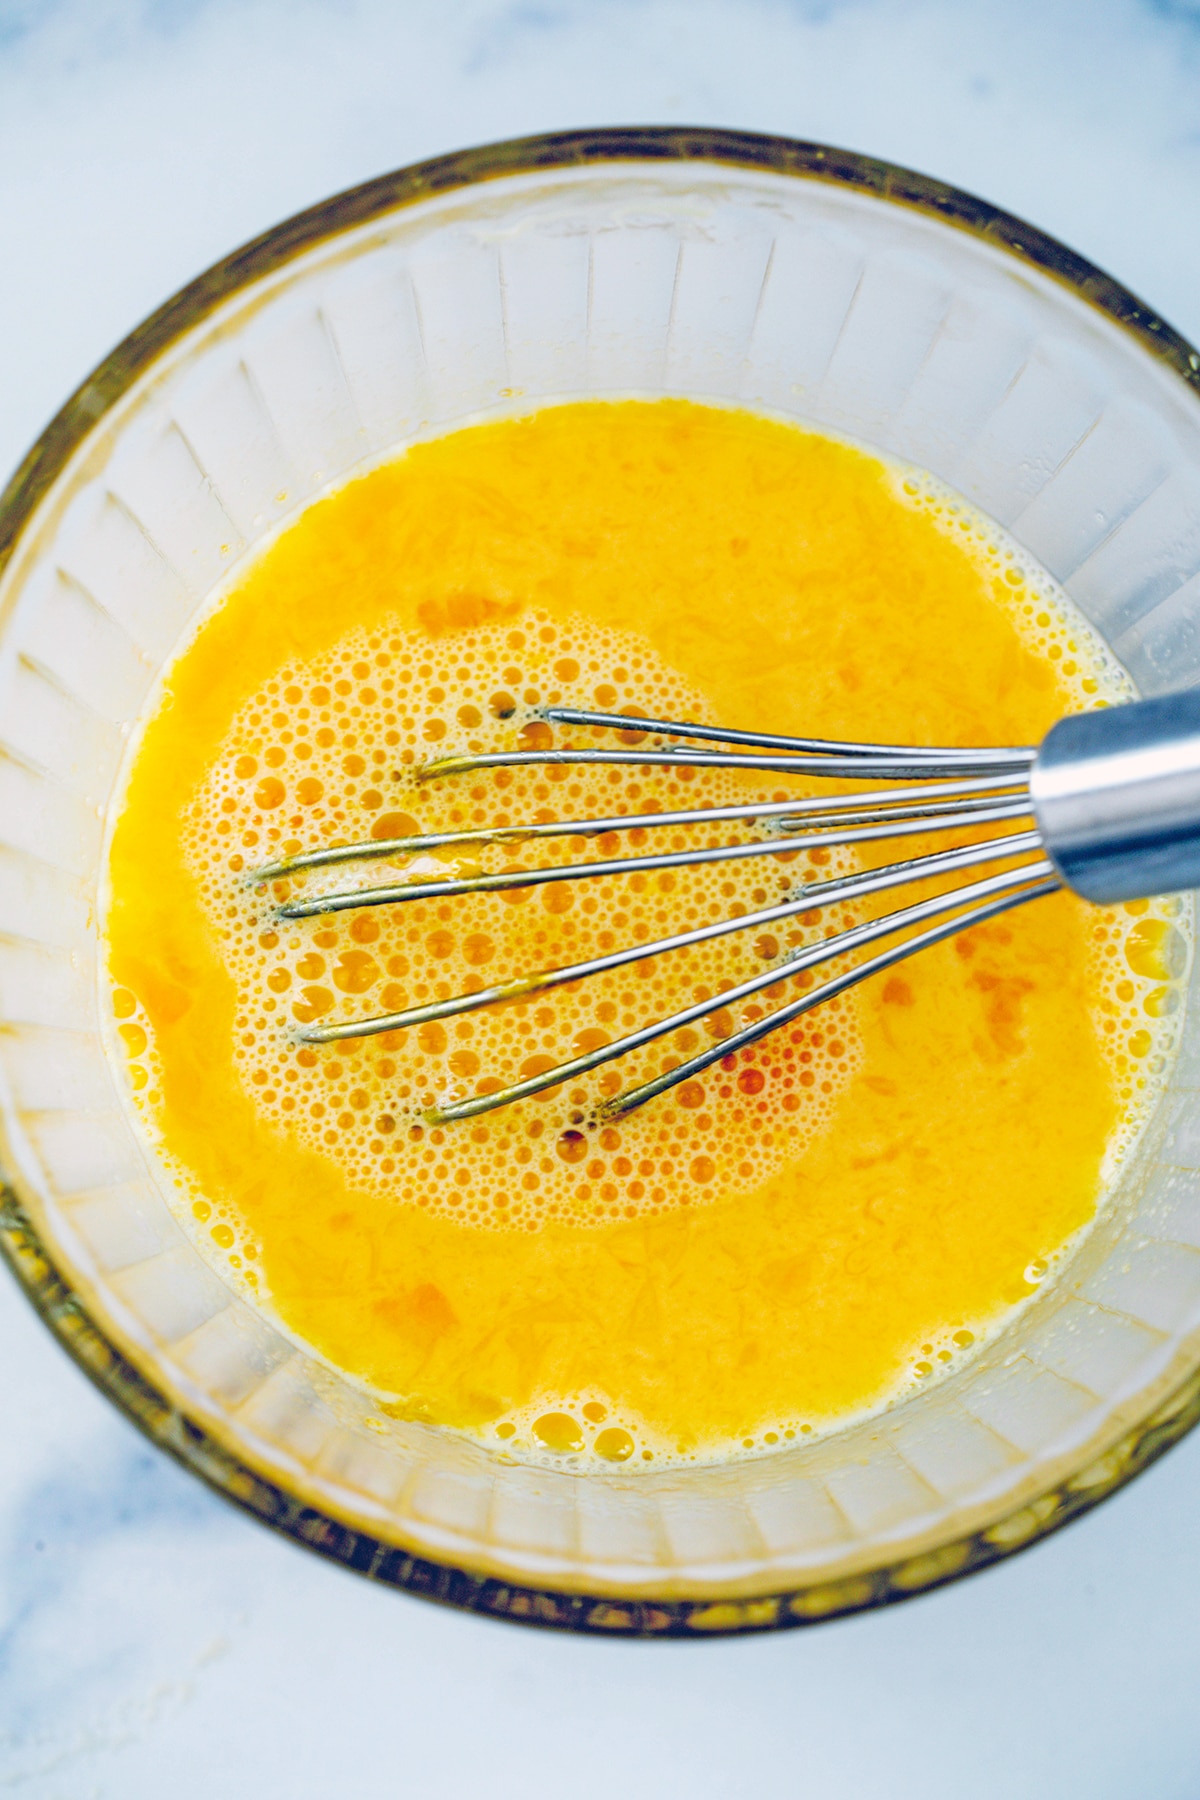 Egg yolks whisked in bowl with warm milk to temper them.